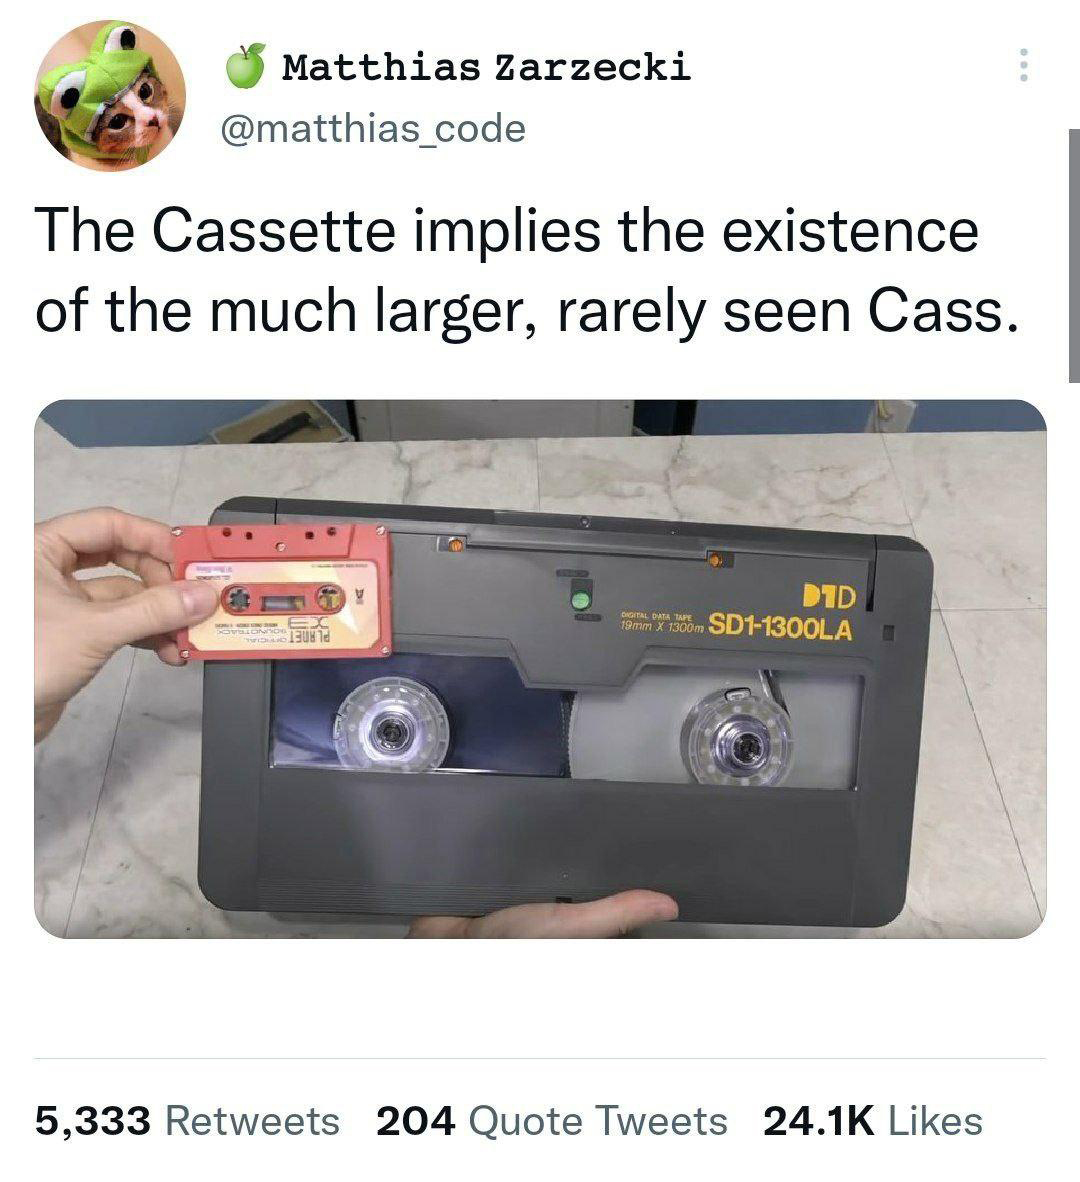 twitter memes - funny memes - cassette and cass - Matthias Zarzecki The Cassette implies the existence of the much larger, rarely seen Cass. Did ismim 1500m SD11300LA Ongital Data Tape Olson 1307 5,333 204 Quote Tweets